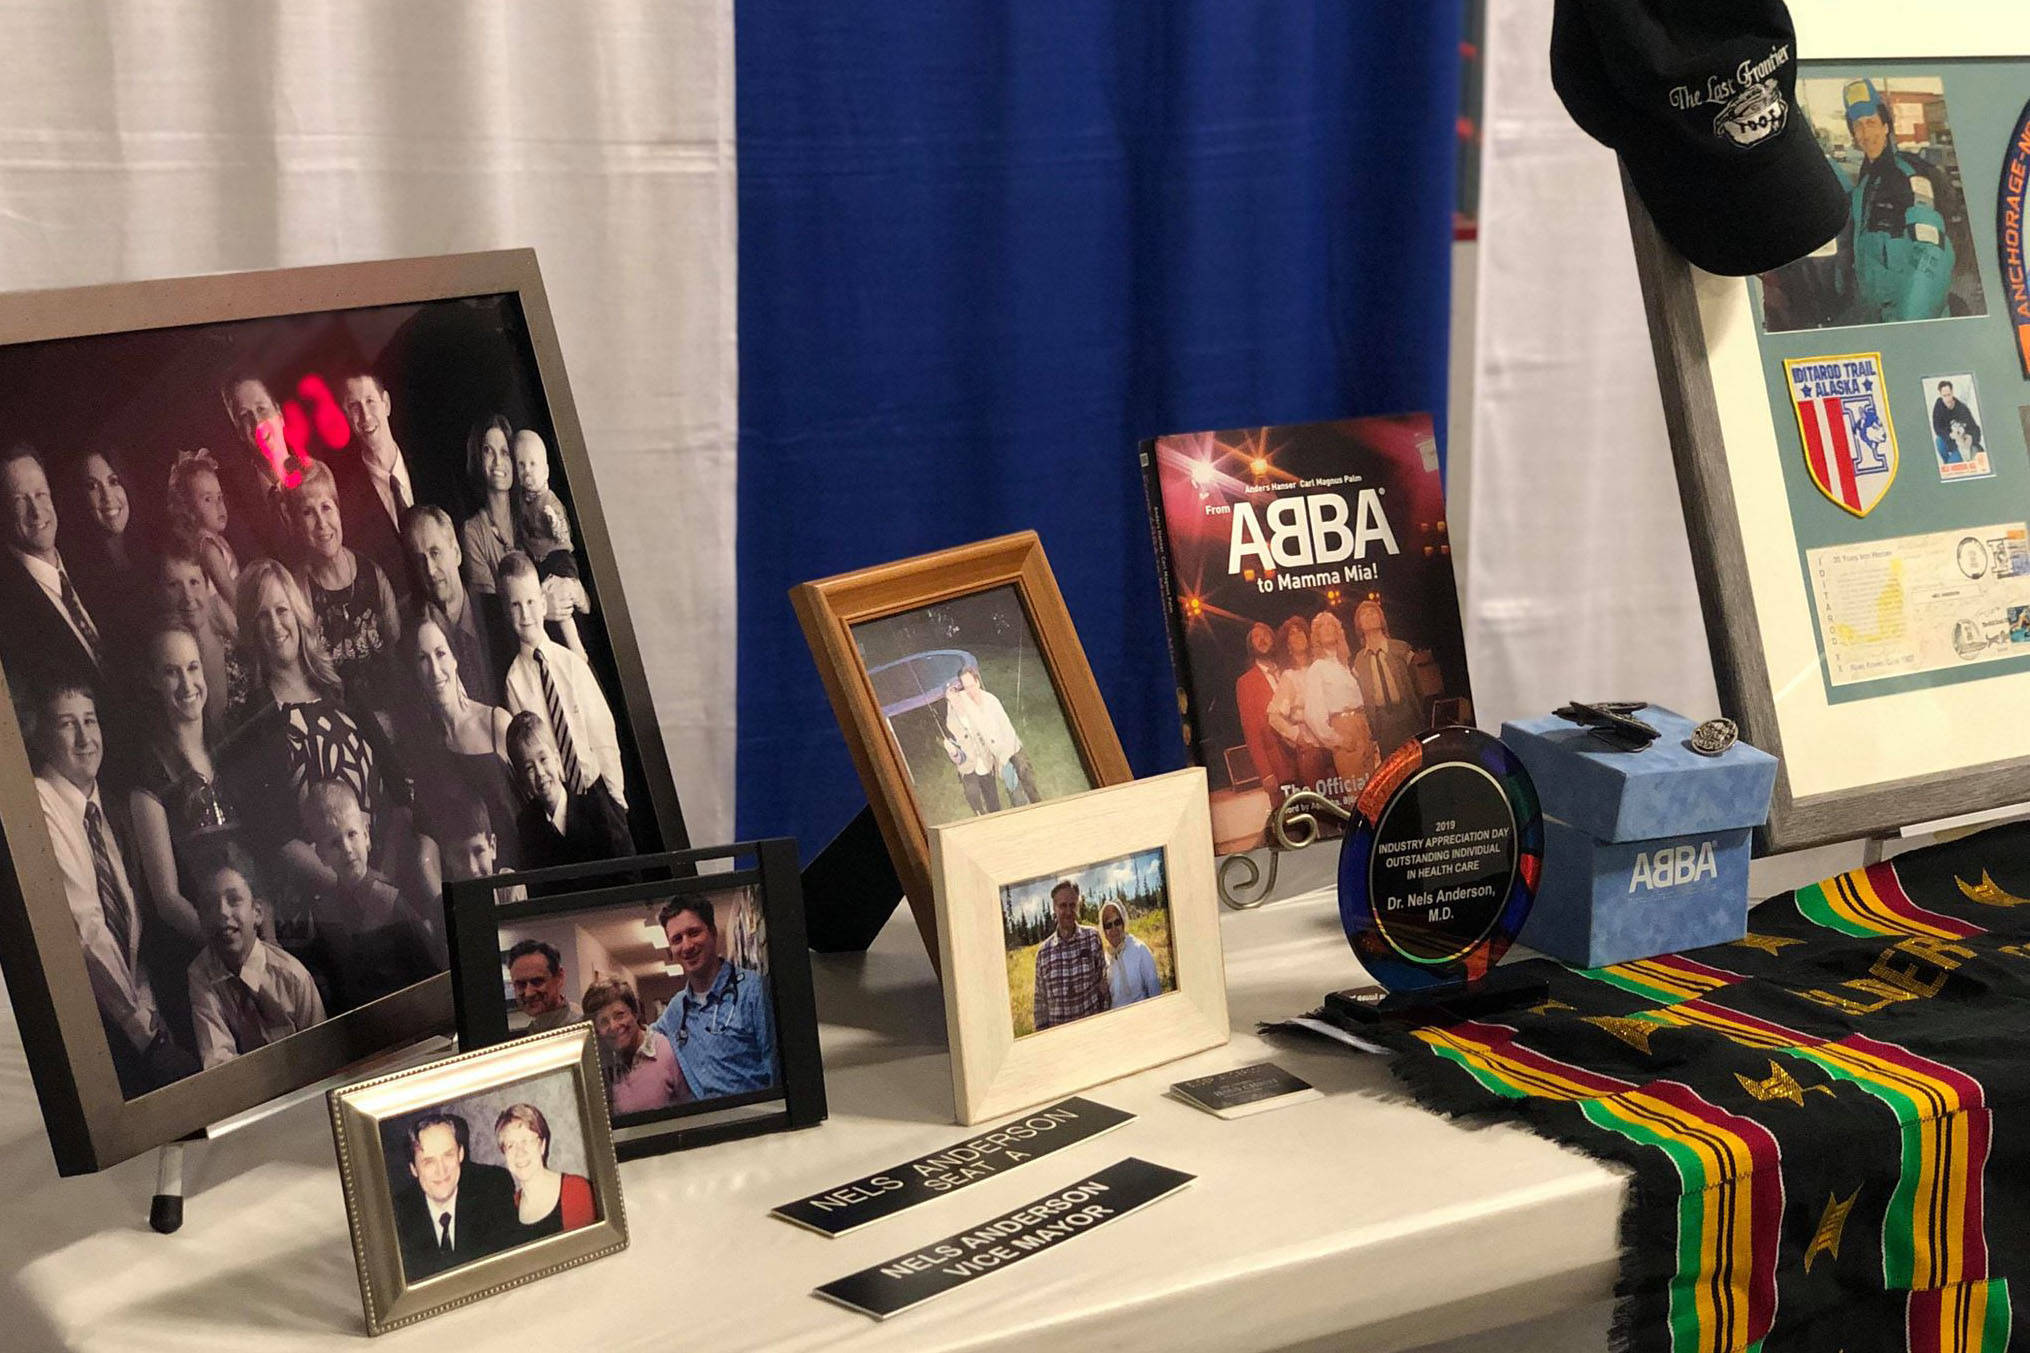 Memorabilia belonging to the late Dr. John ‘Nels’ Anderson, who was serving as Soldotna’s Mayor, were on display at the Soldotna Regional Sports Complex during a community memorial service, Monday night, in Soldotna, Alaska. (Photo by Victoria Petersen/Peninsula Clarion)